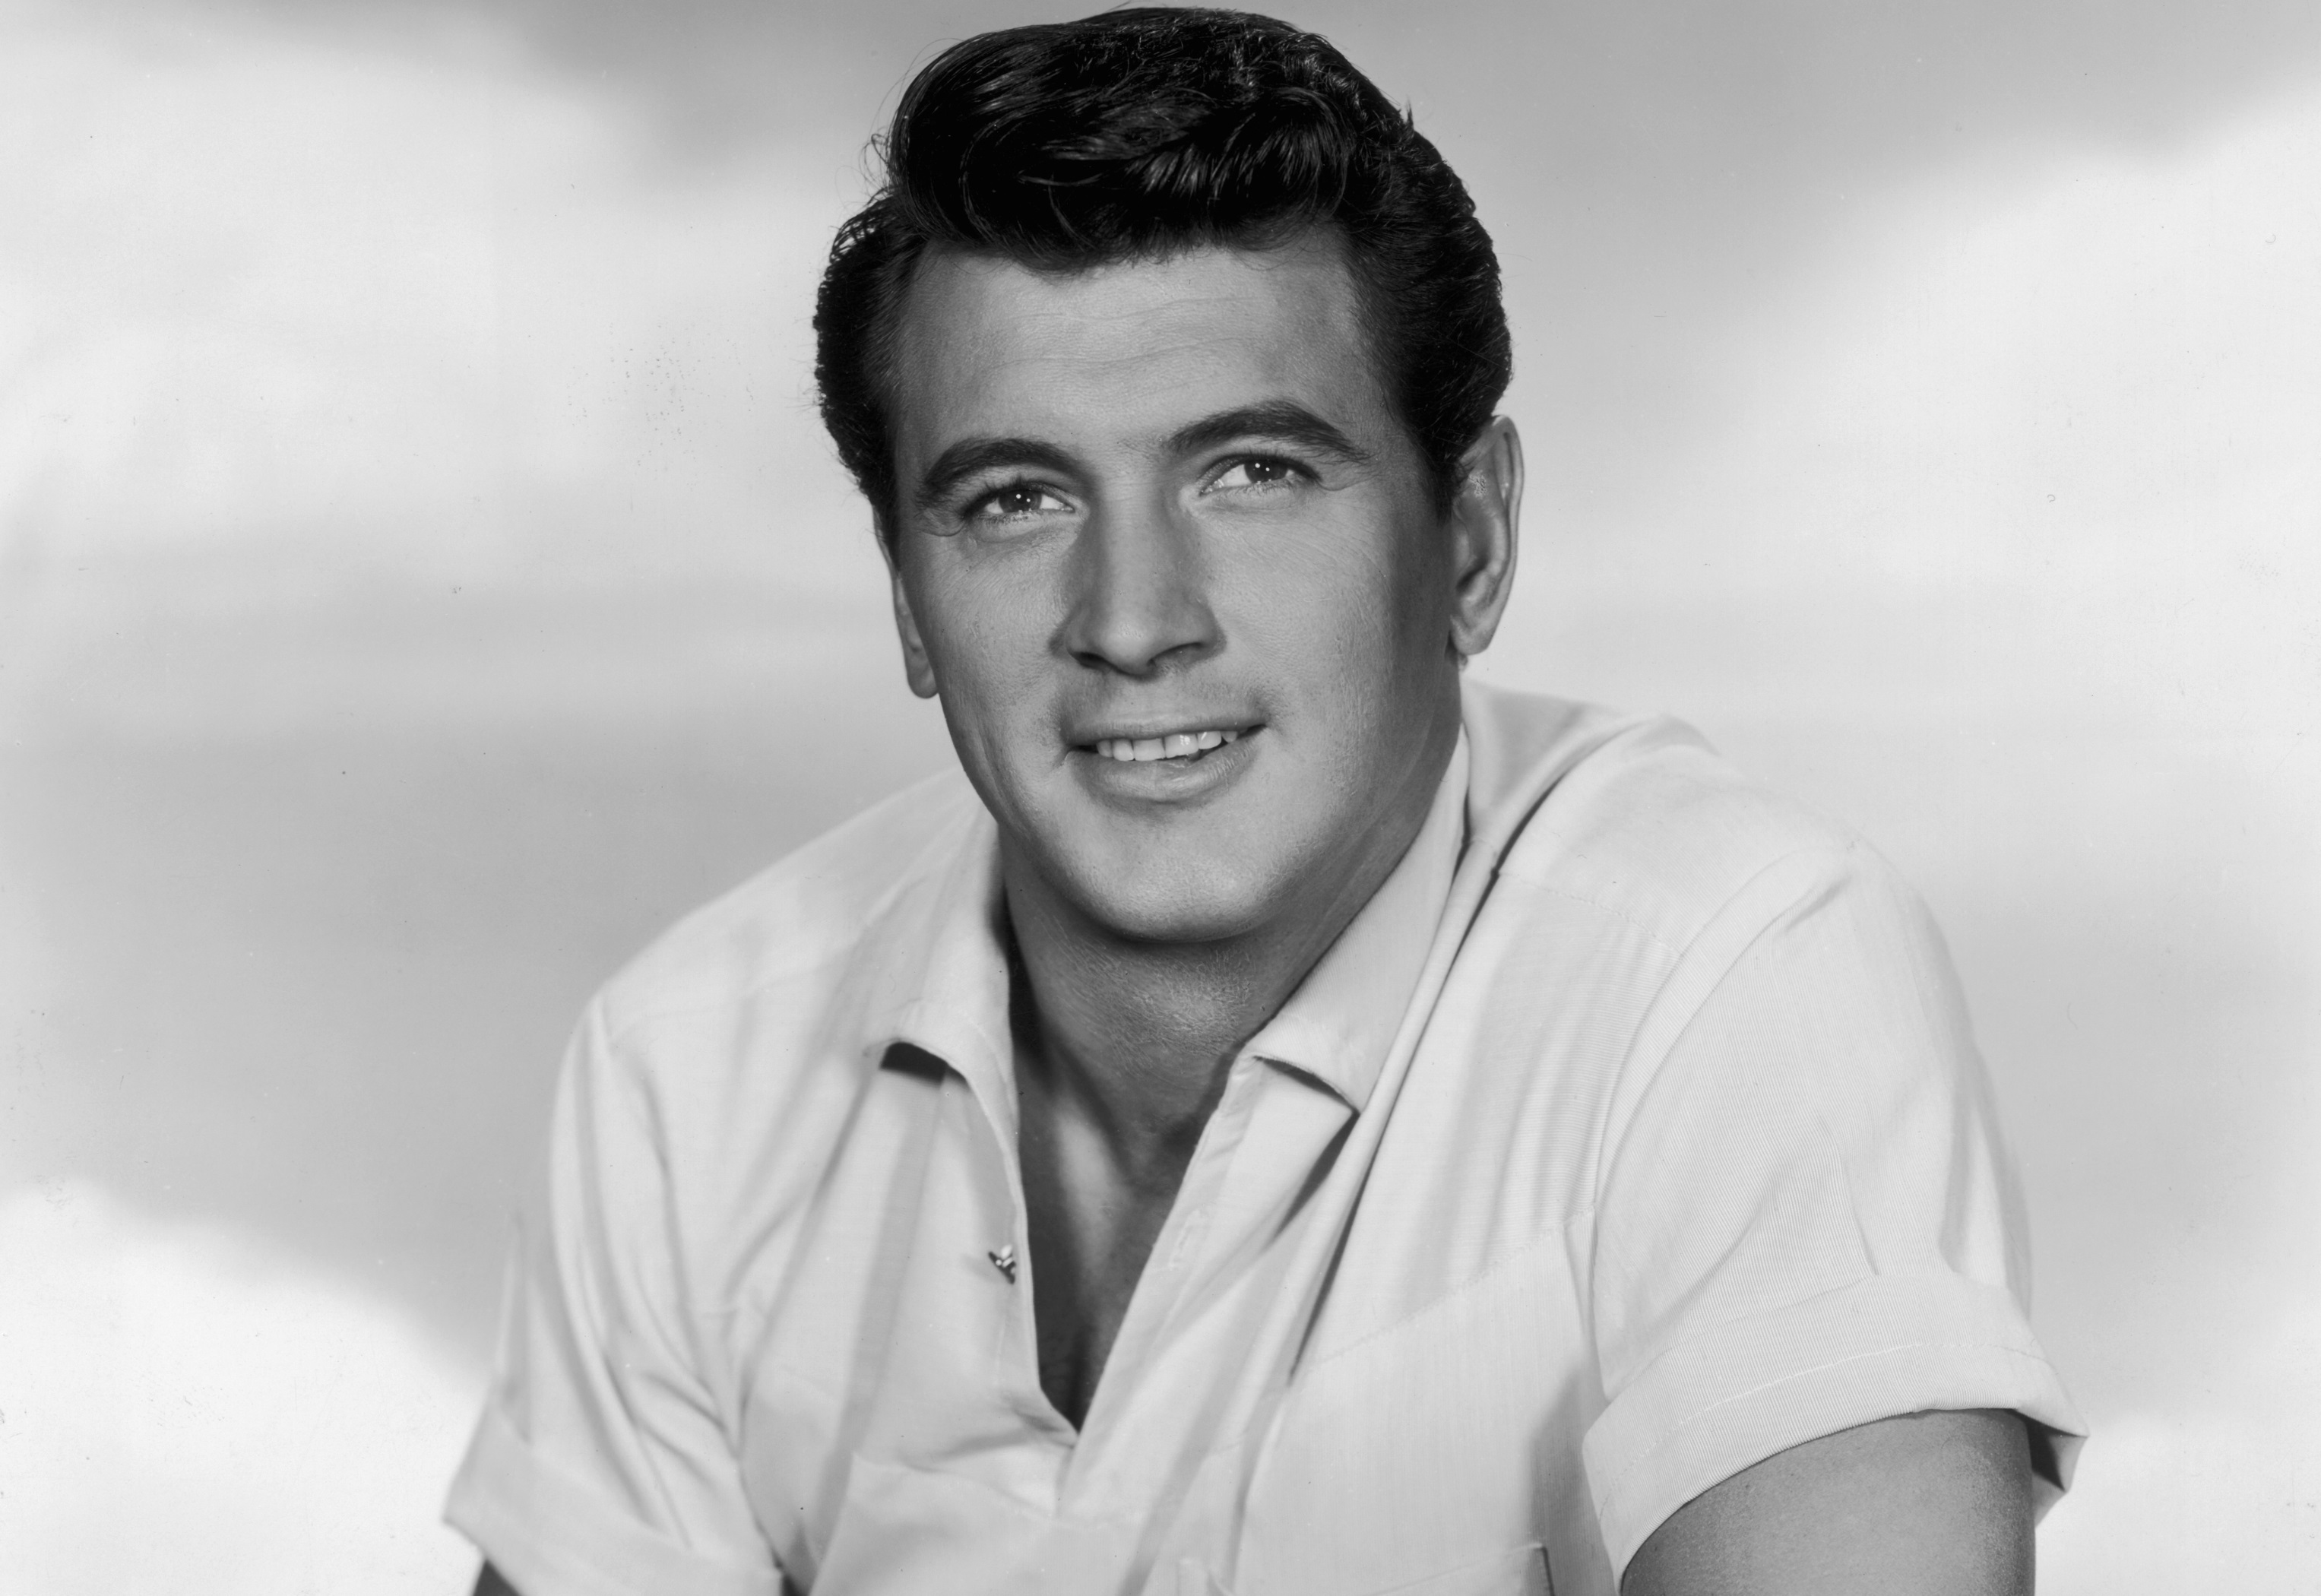 American film star Rock Hudson poses for a photo in 1956